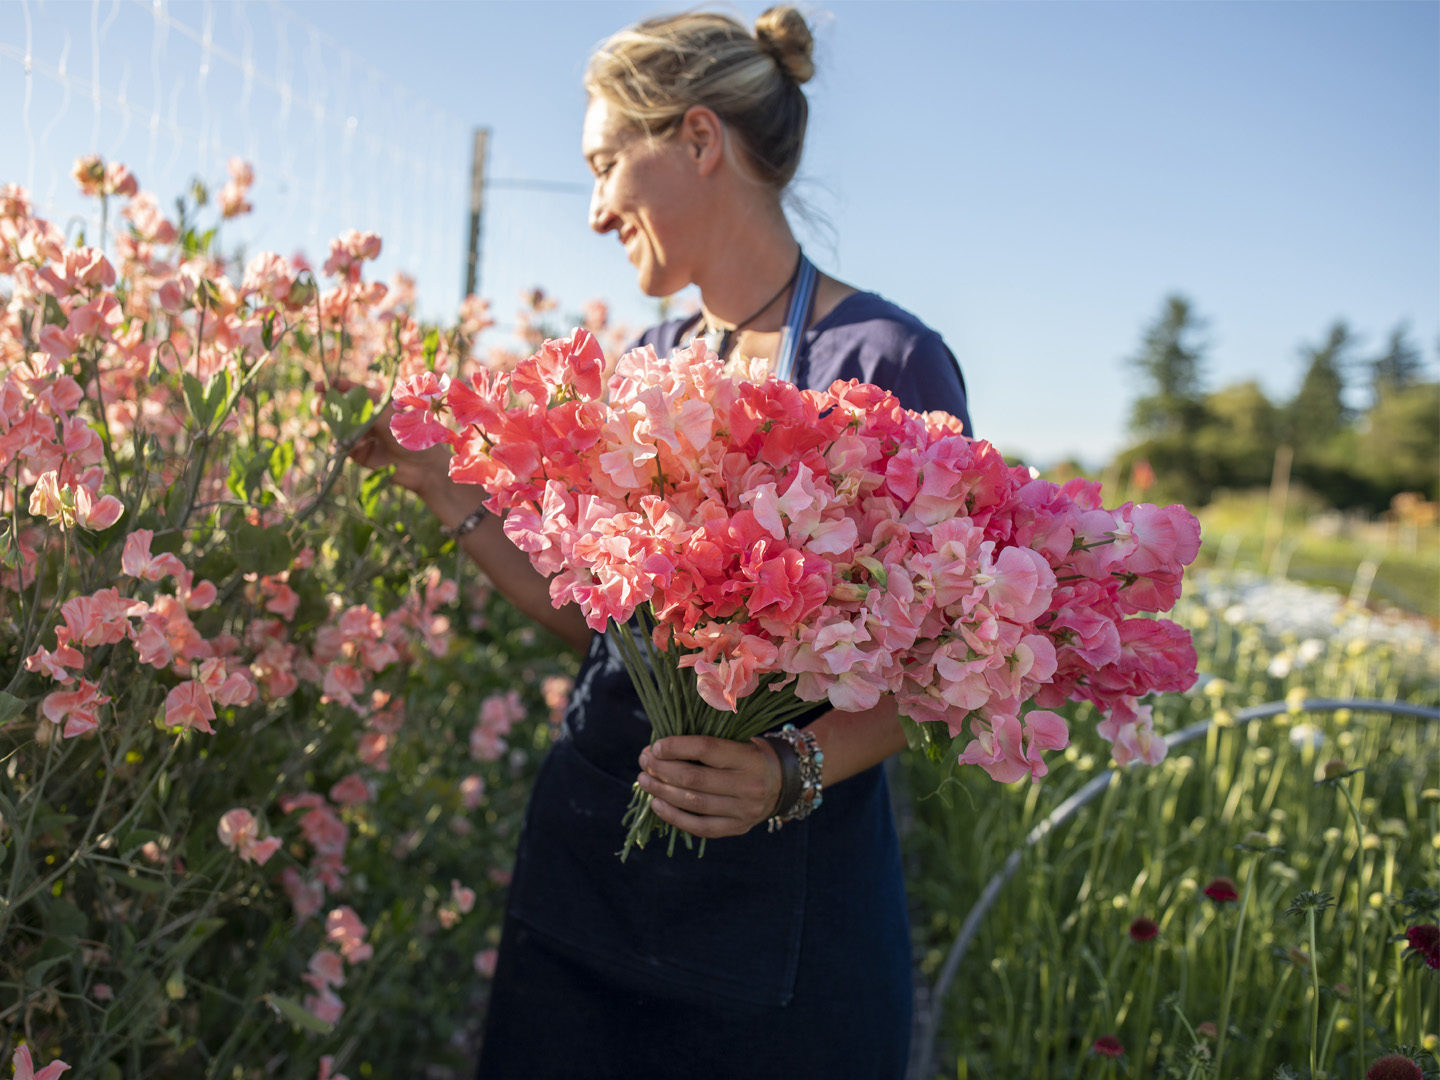 Erin Benzakein with a handful of sweet peas in the Floret field